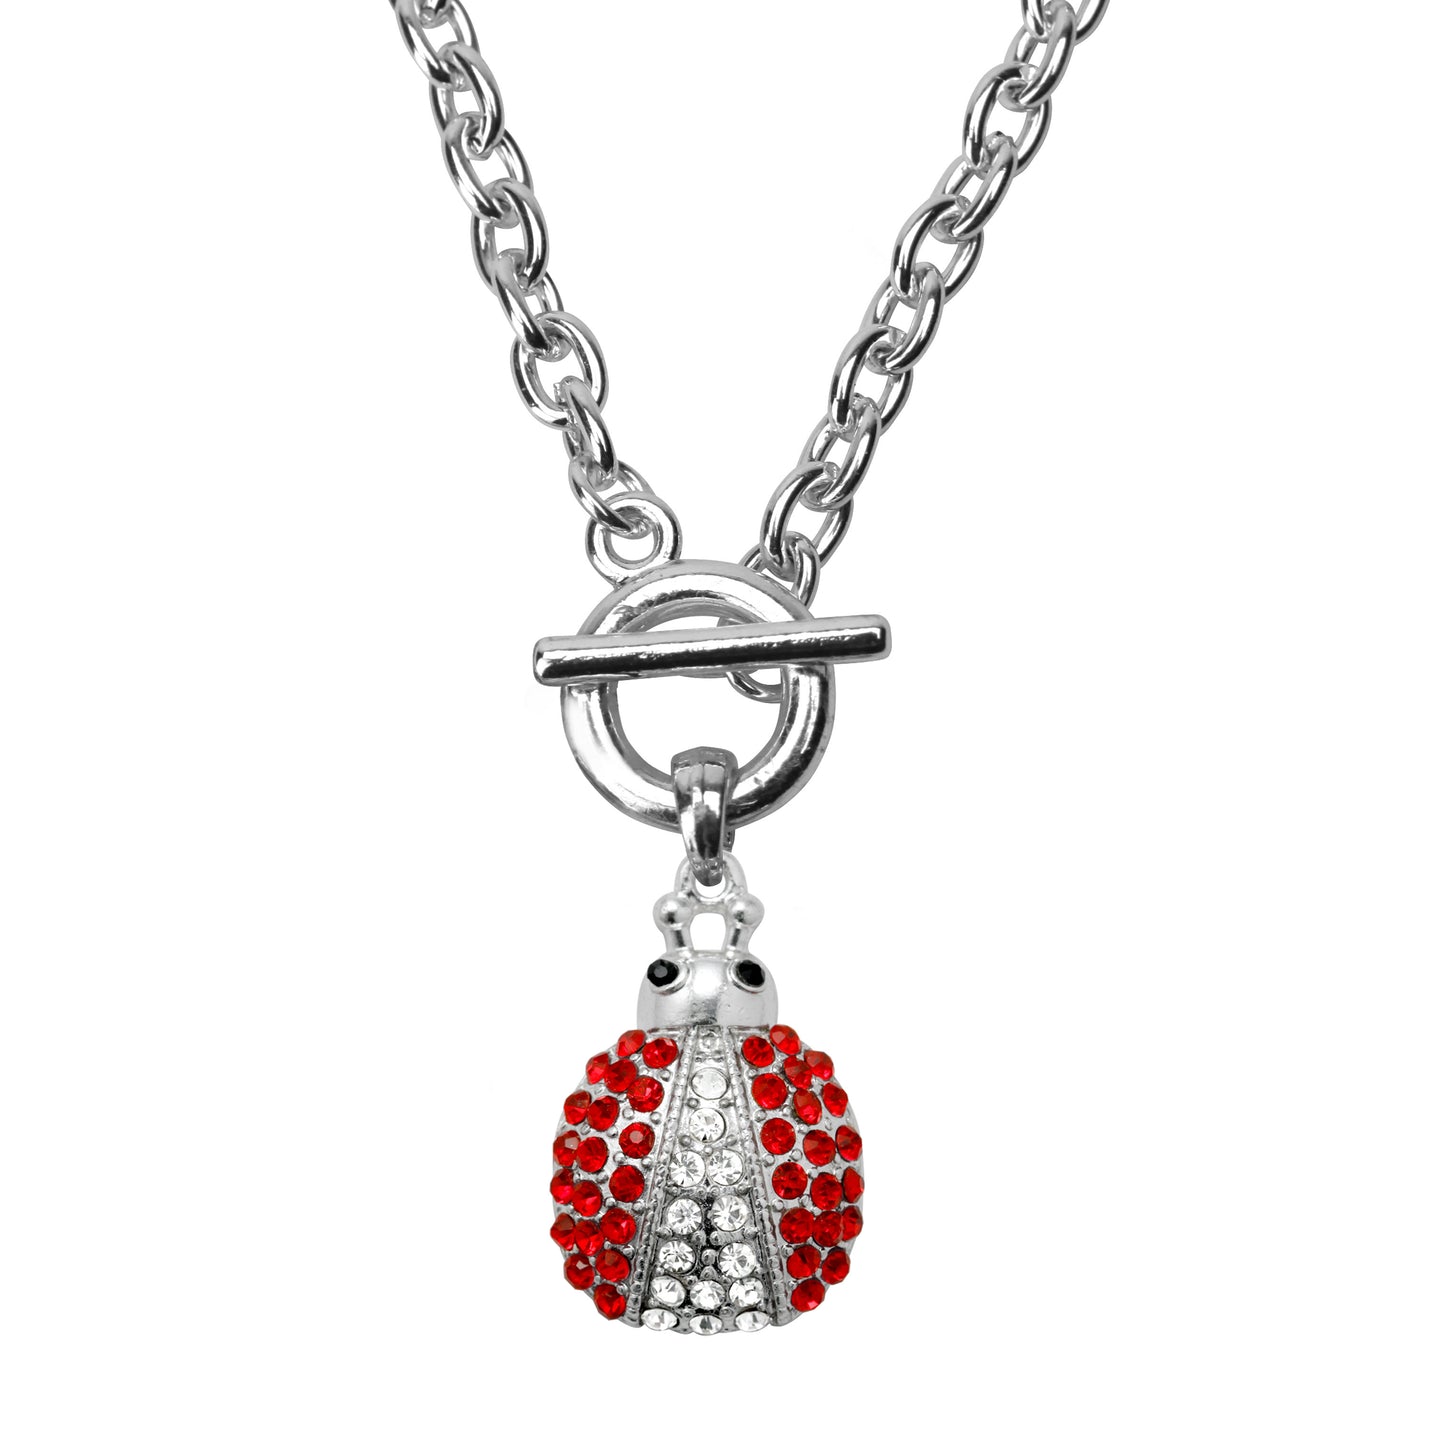 Silver Lady Bug Charm Toggle Necklace